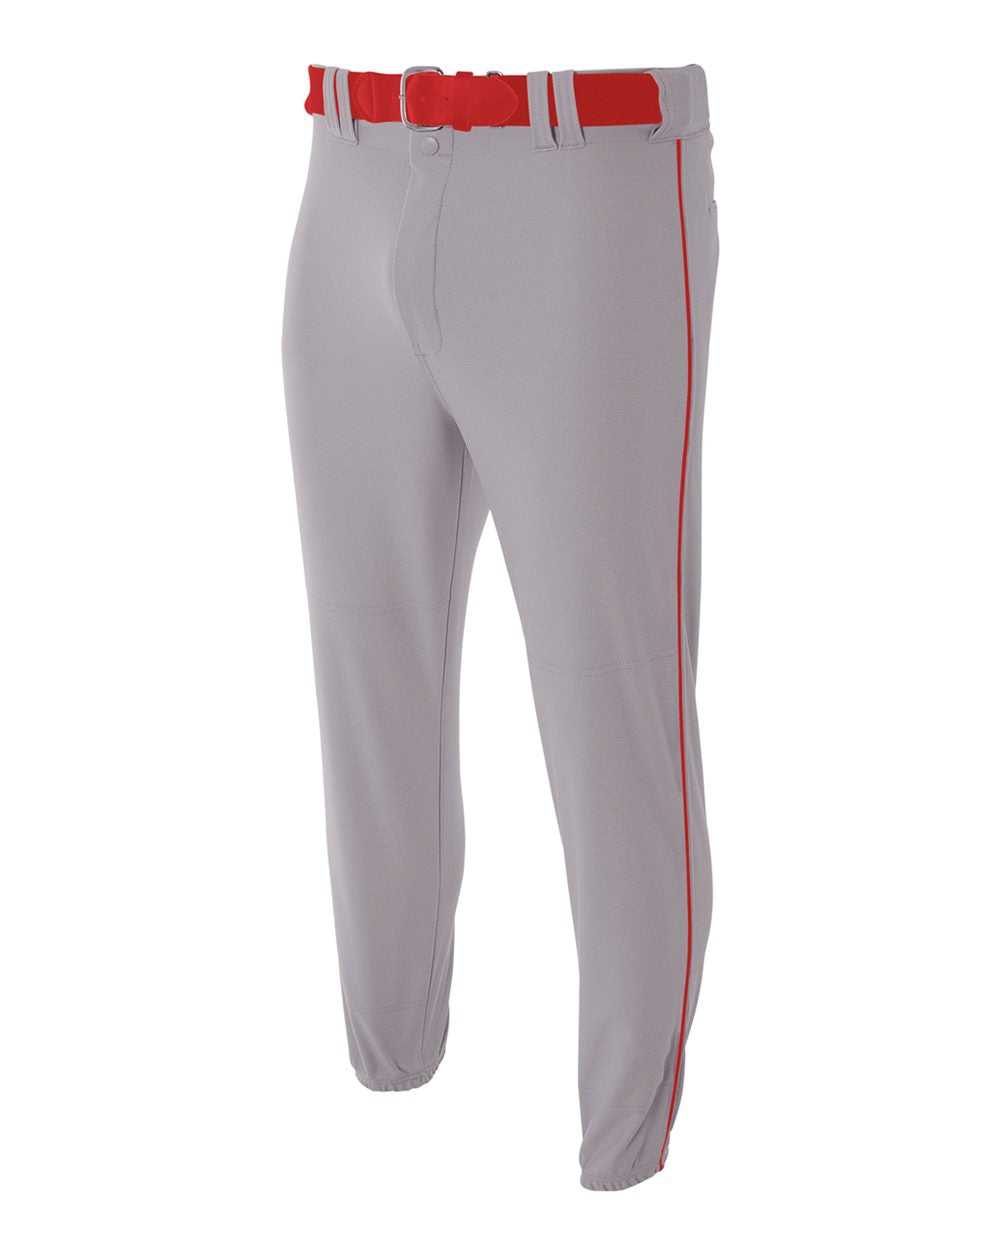 A4 NB6178 Youth Pro Style Elastic Bottom Baseball Pant - Gray Scarlet - HIT a Double